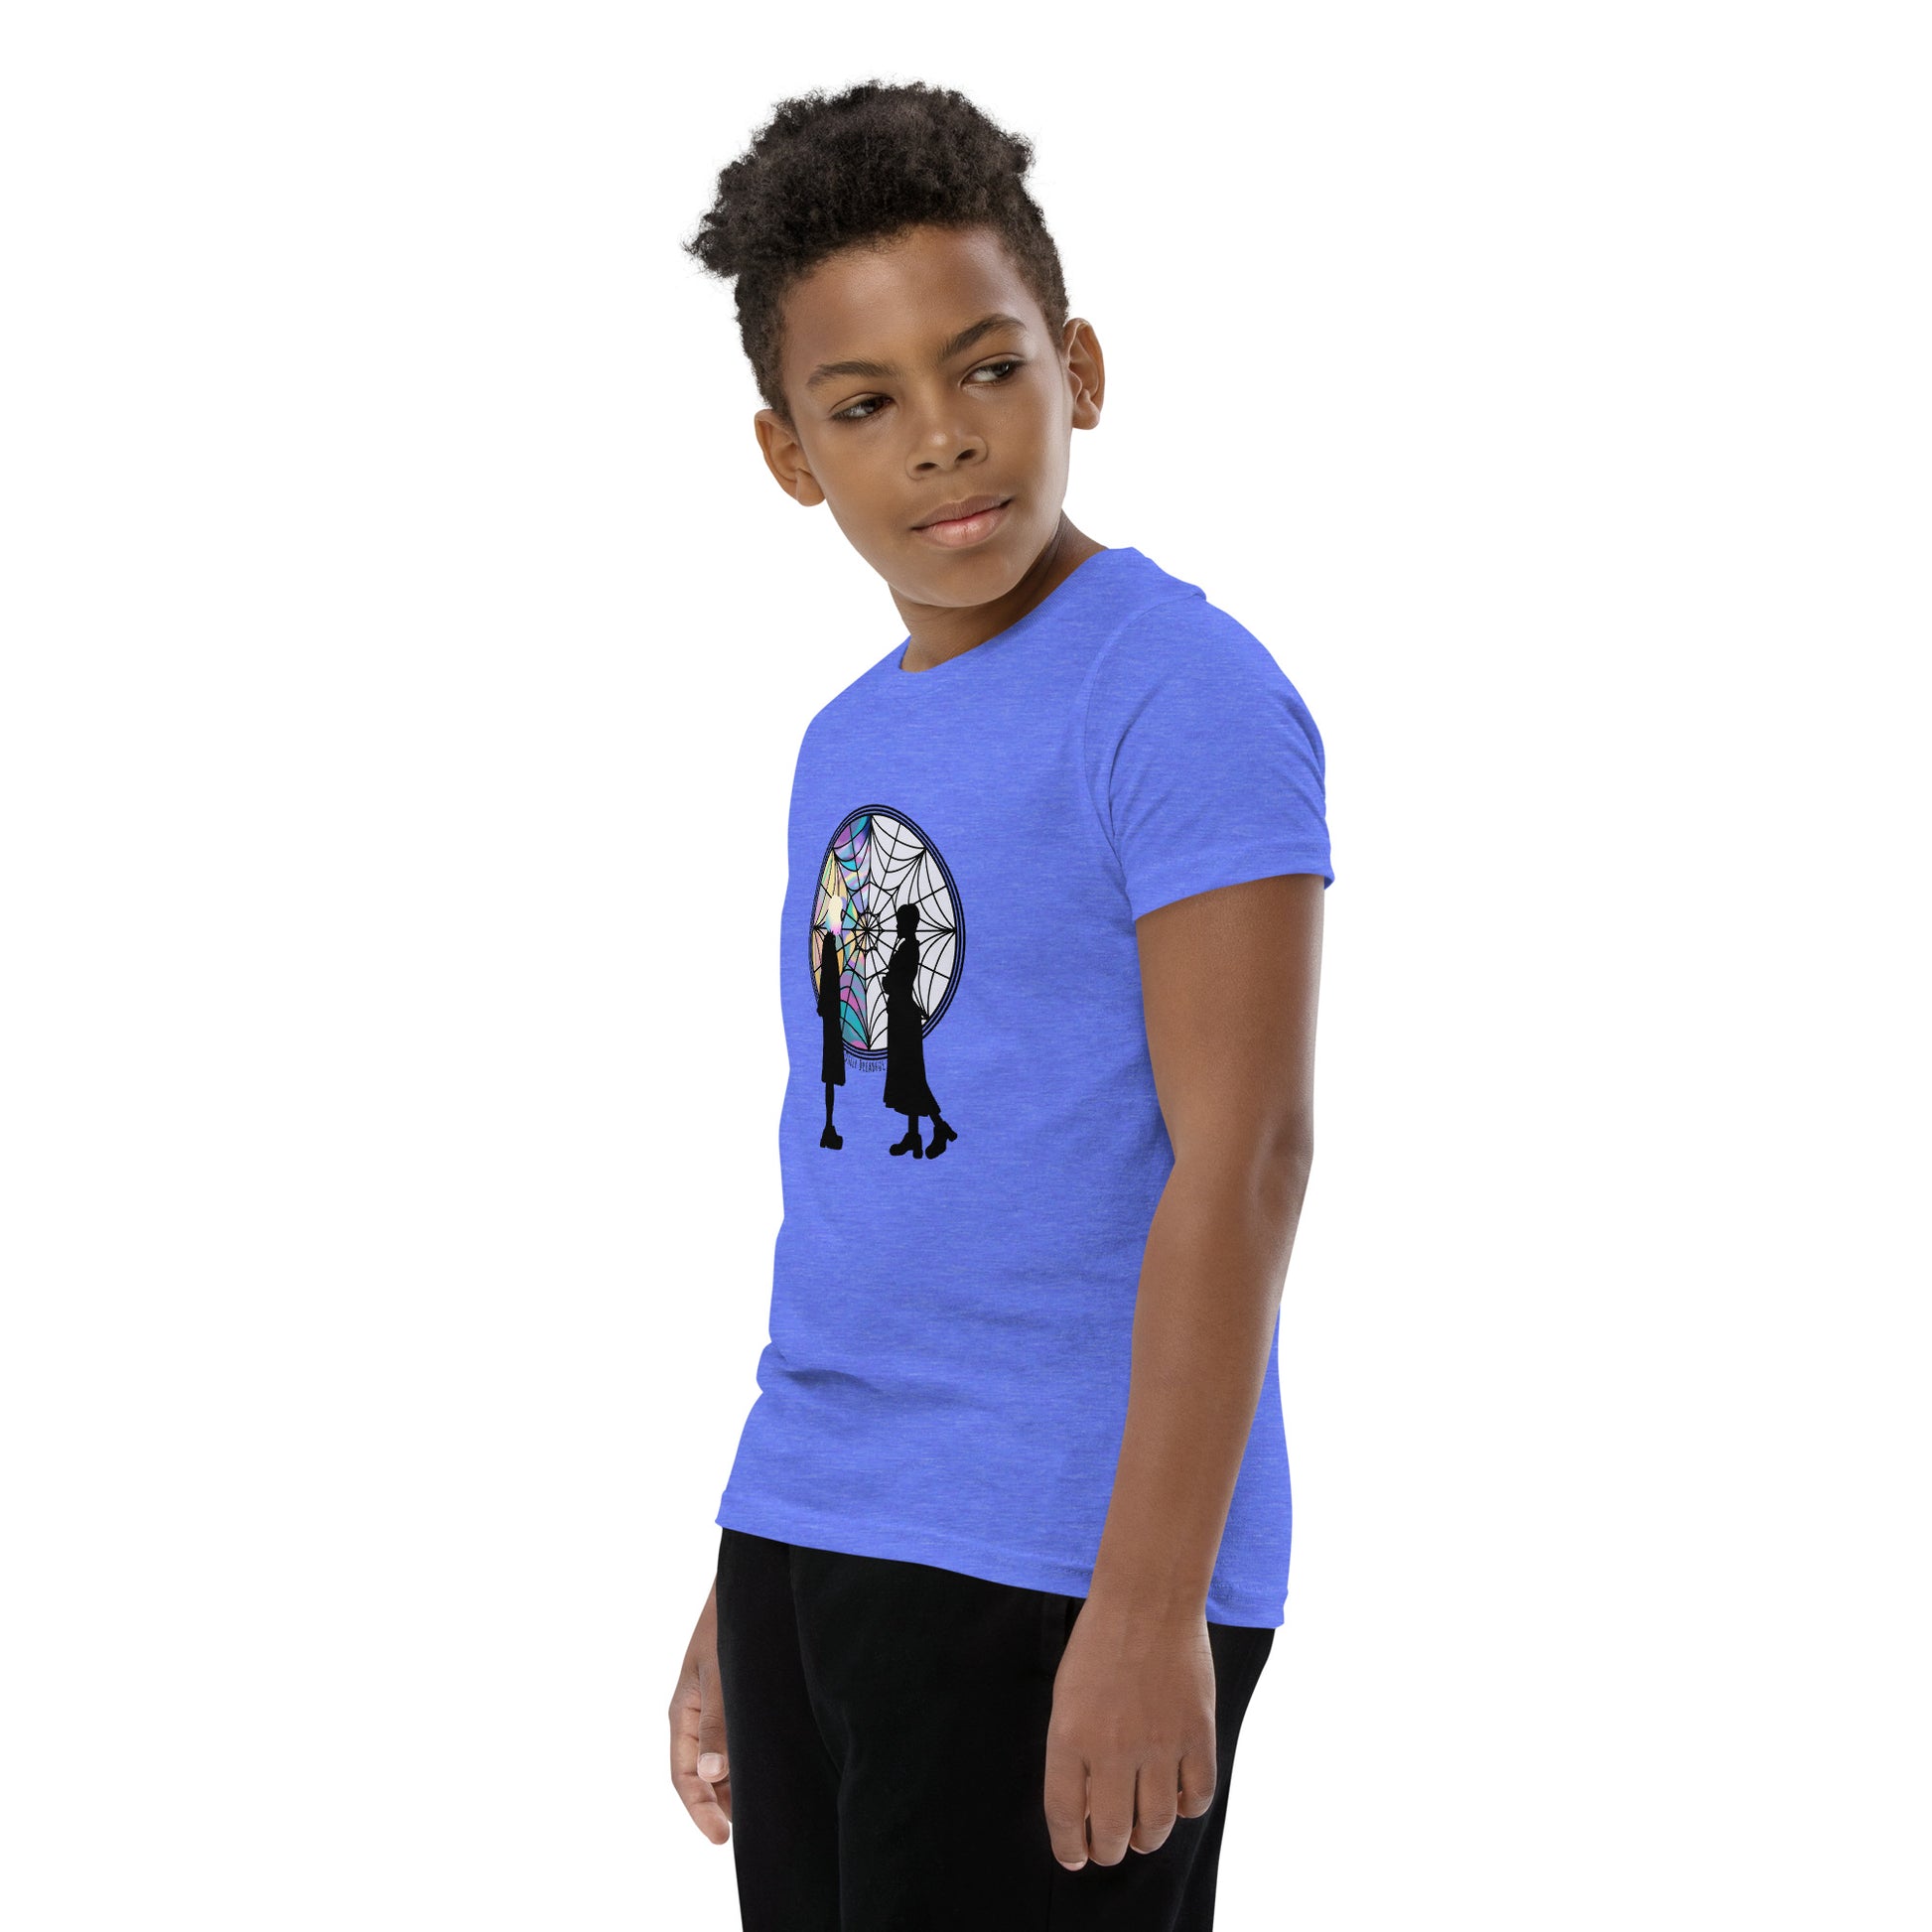 heather columbia blue "Wednesday Addams and Enid" Youth Short Sleeve T-Shirt from Daily Dreadful